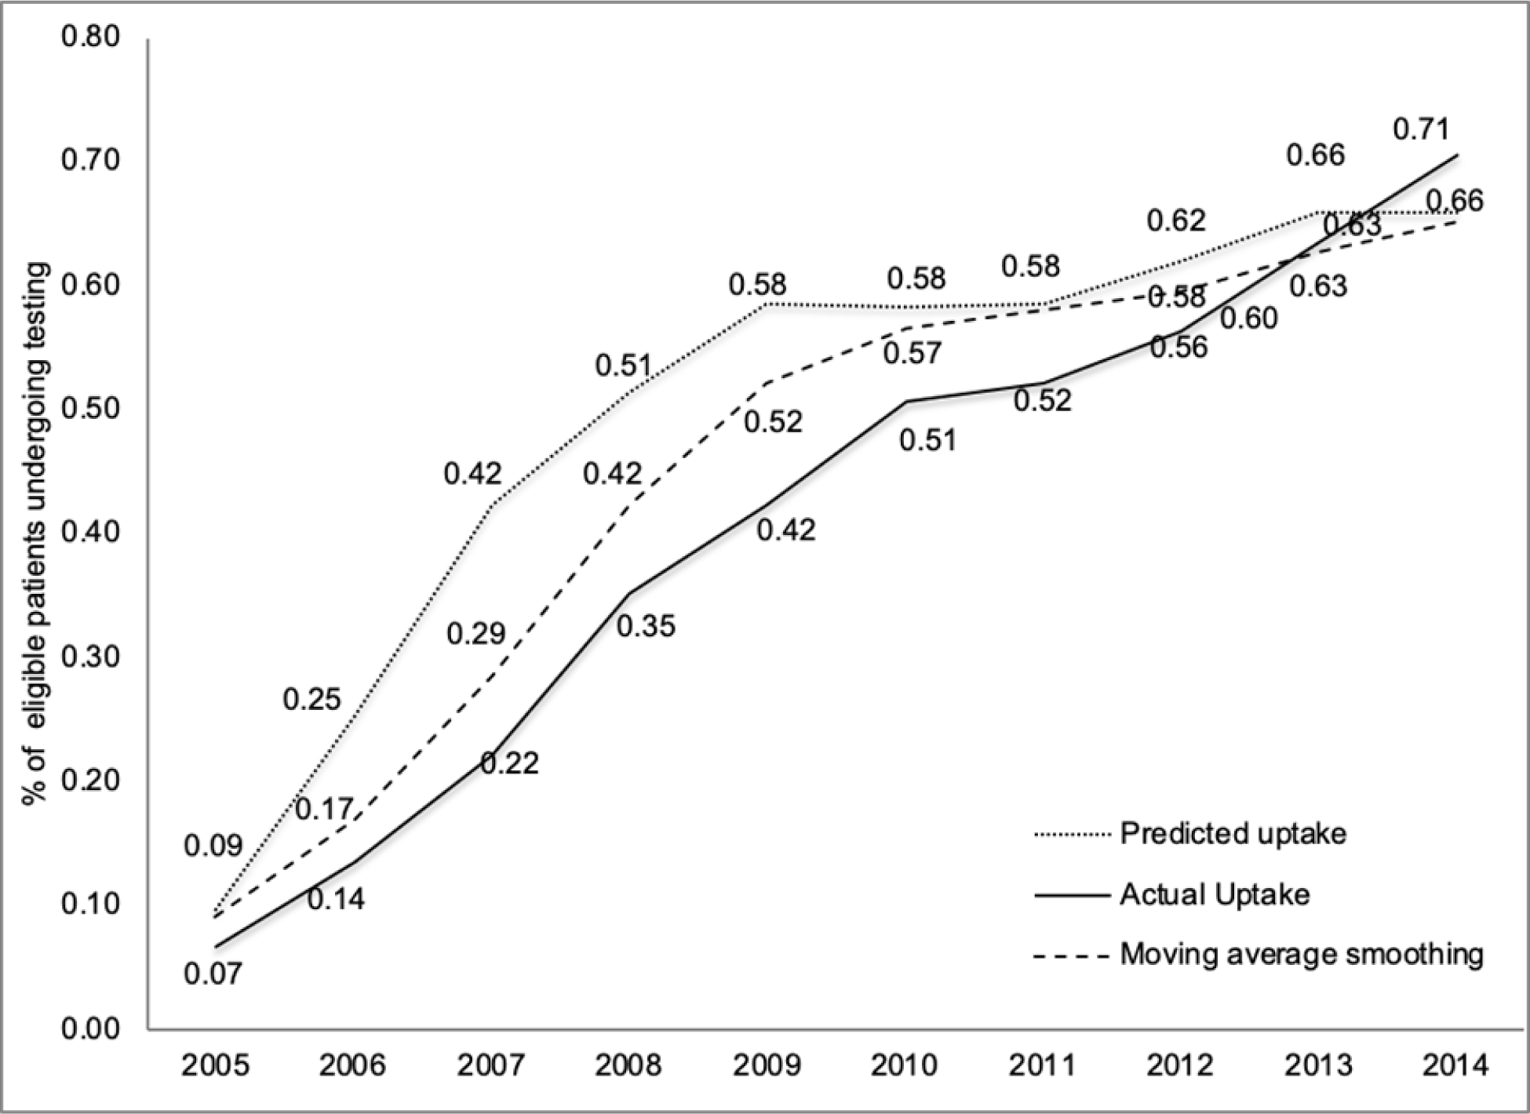 Examination of the percentage of eligible patients undergoing testing by year, from 2005 to 2014. The actual and predicted uptake of demand for testing increases by year.